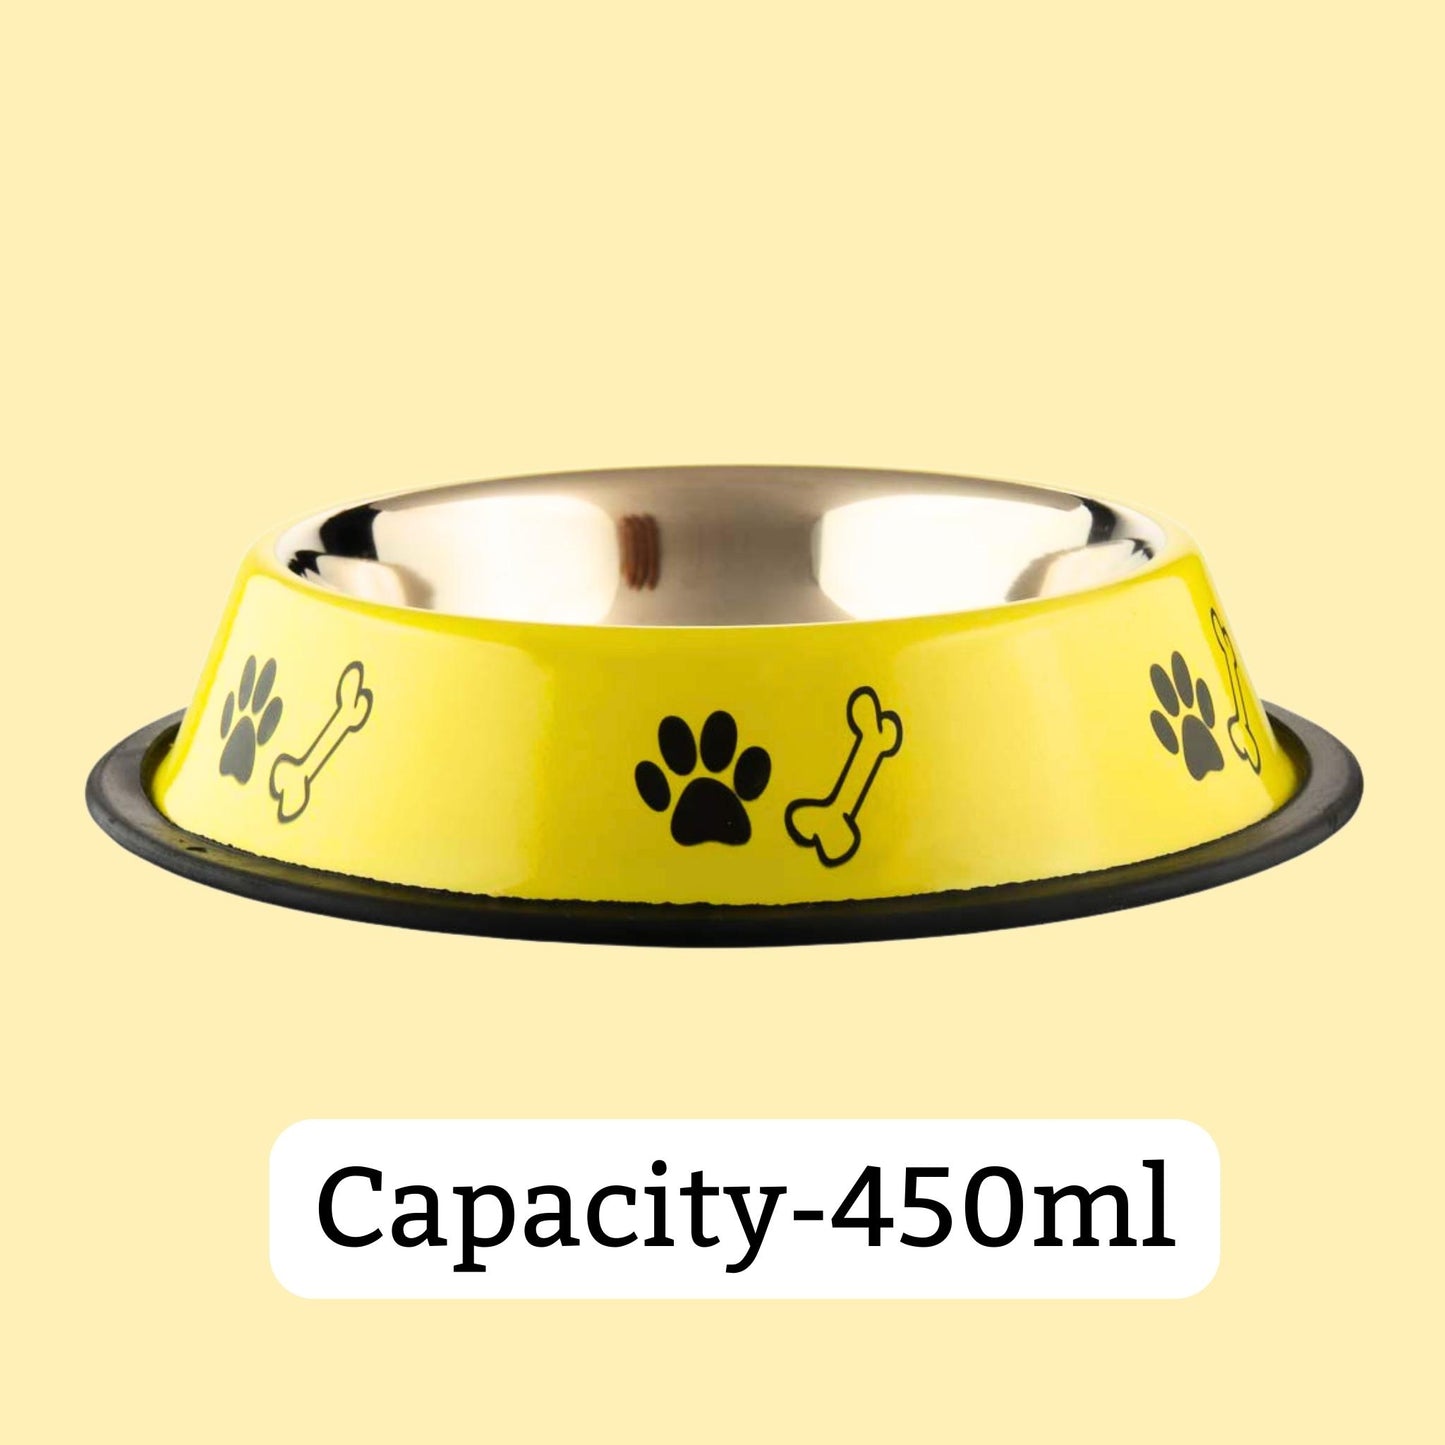 Foodie Puppies Printed Steel Bowl for Pets - 450ml (Yellow), Pack of 2